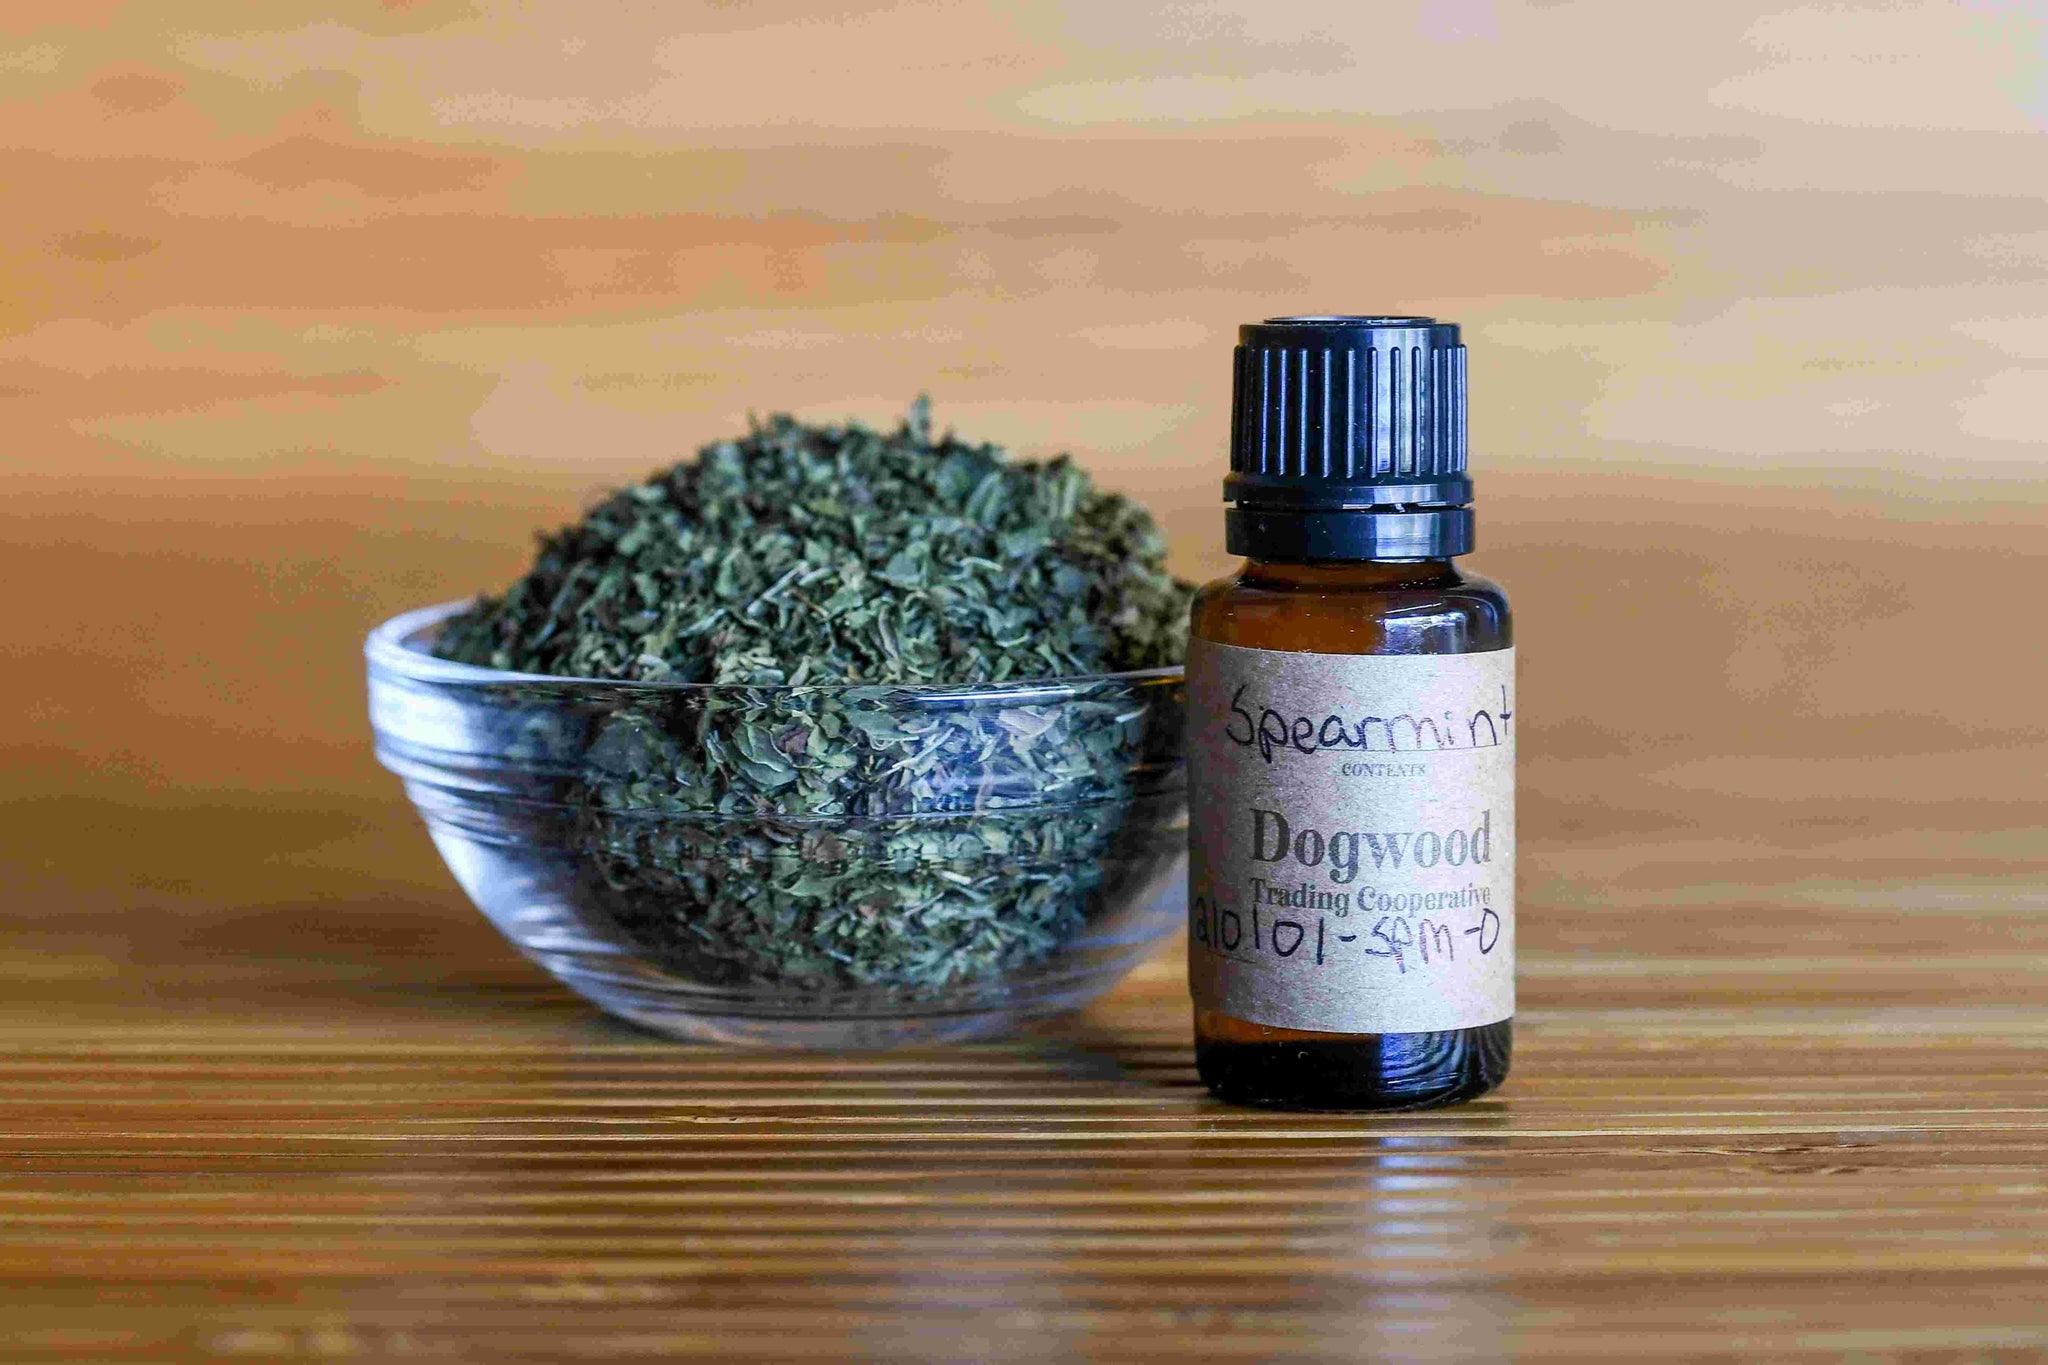 Spearmint (Organic ) - Retail - The Dogwood Trading Cooperative